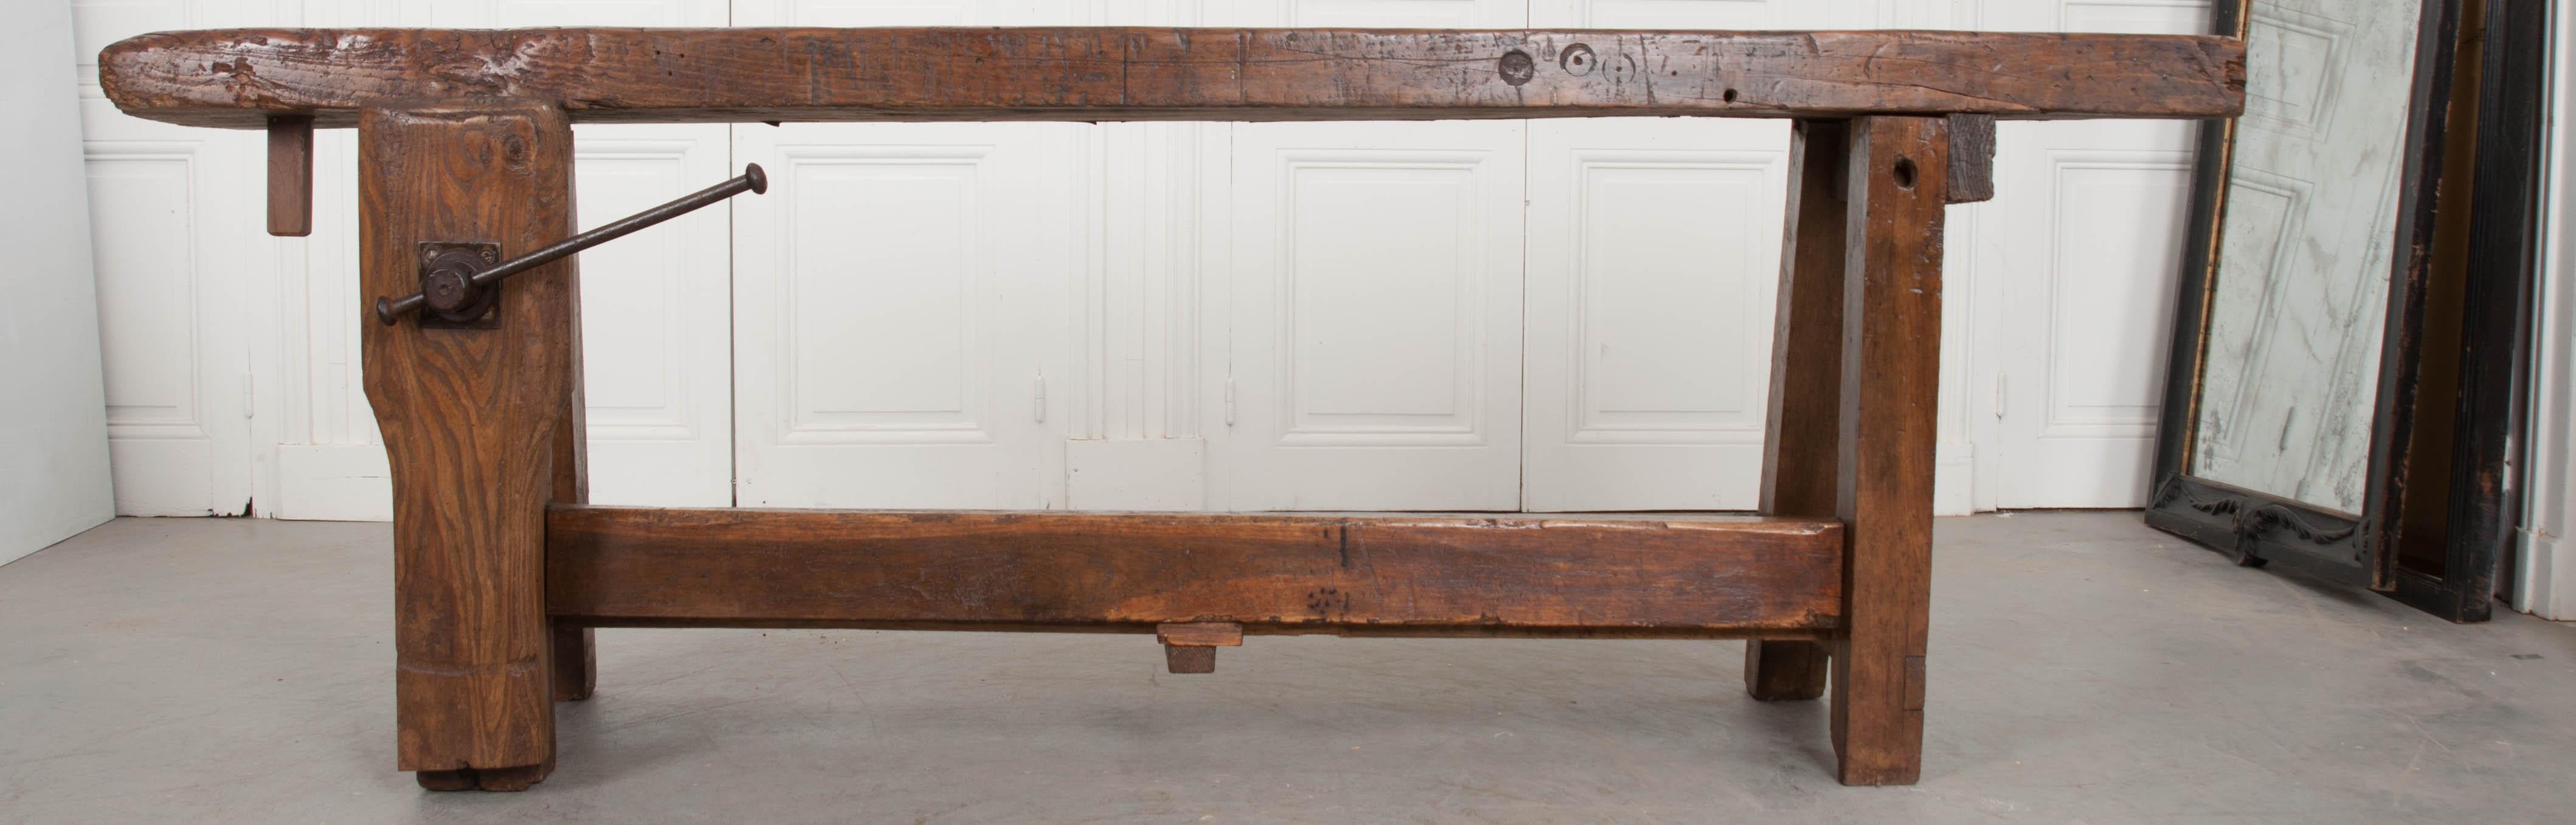 Antique workbenches have a way of telling their story more than most other antiques. They are raw and honest, with scars worn proudly from projects past. Saw marks, dings and dents only improve their charismatic appeal. This bench was made of solid